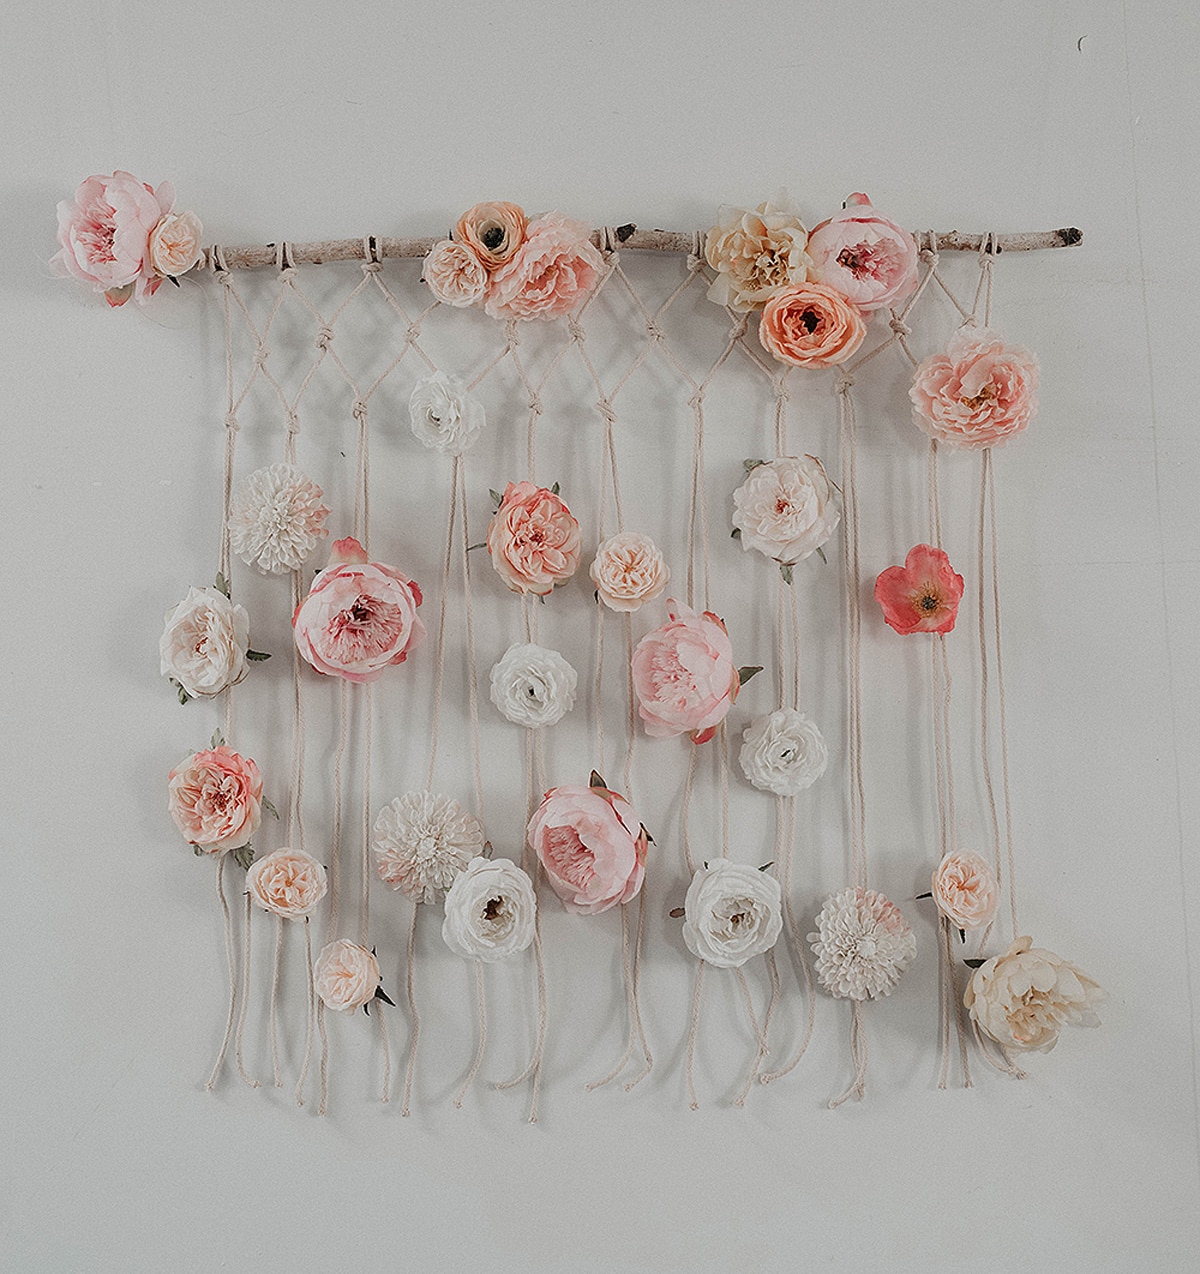 macramé wall hanging with flowers